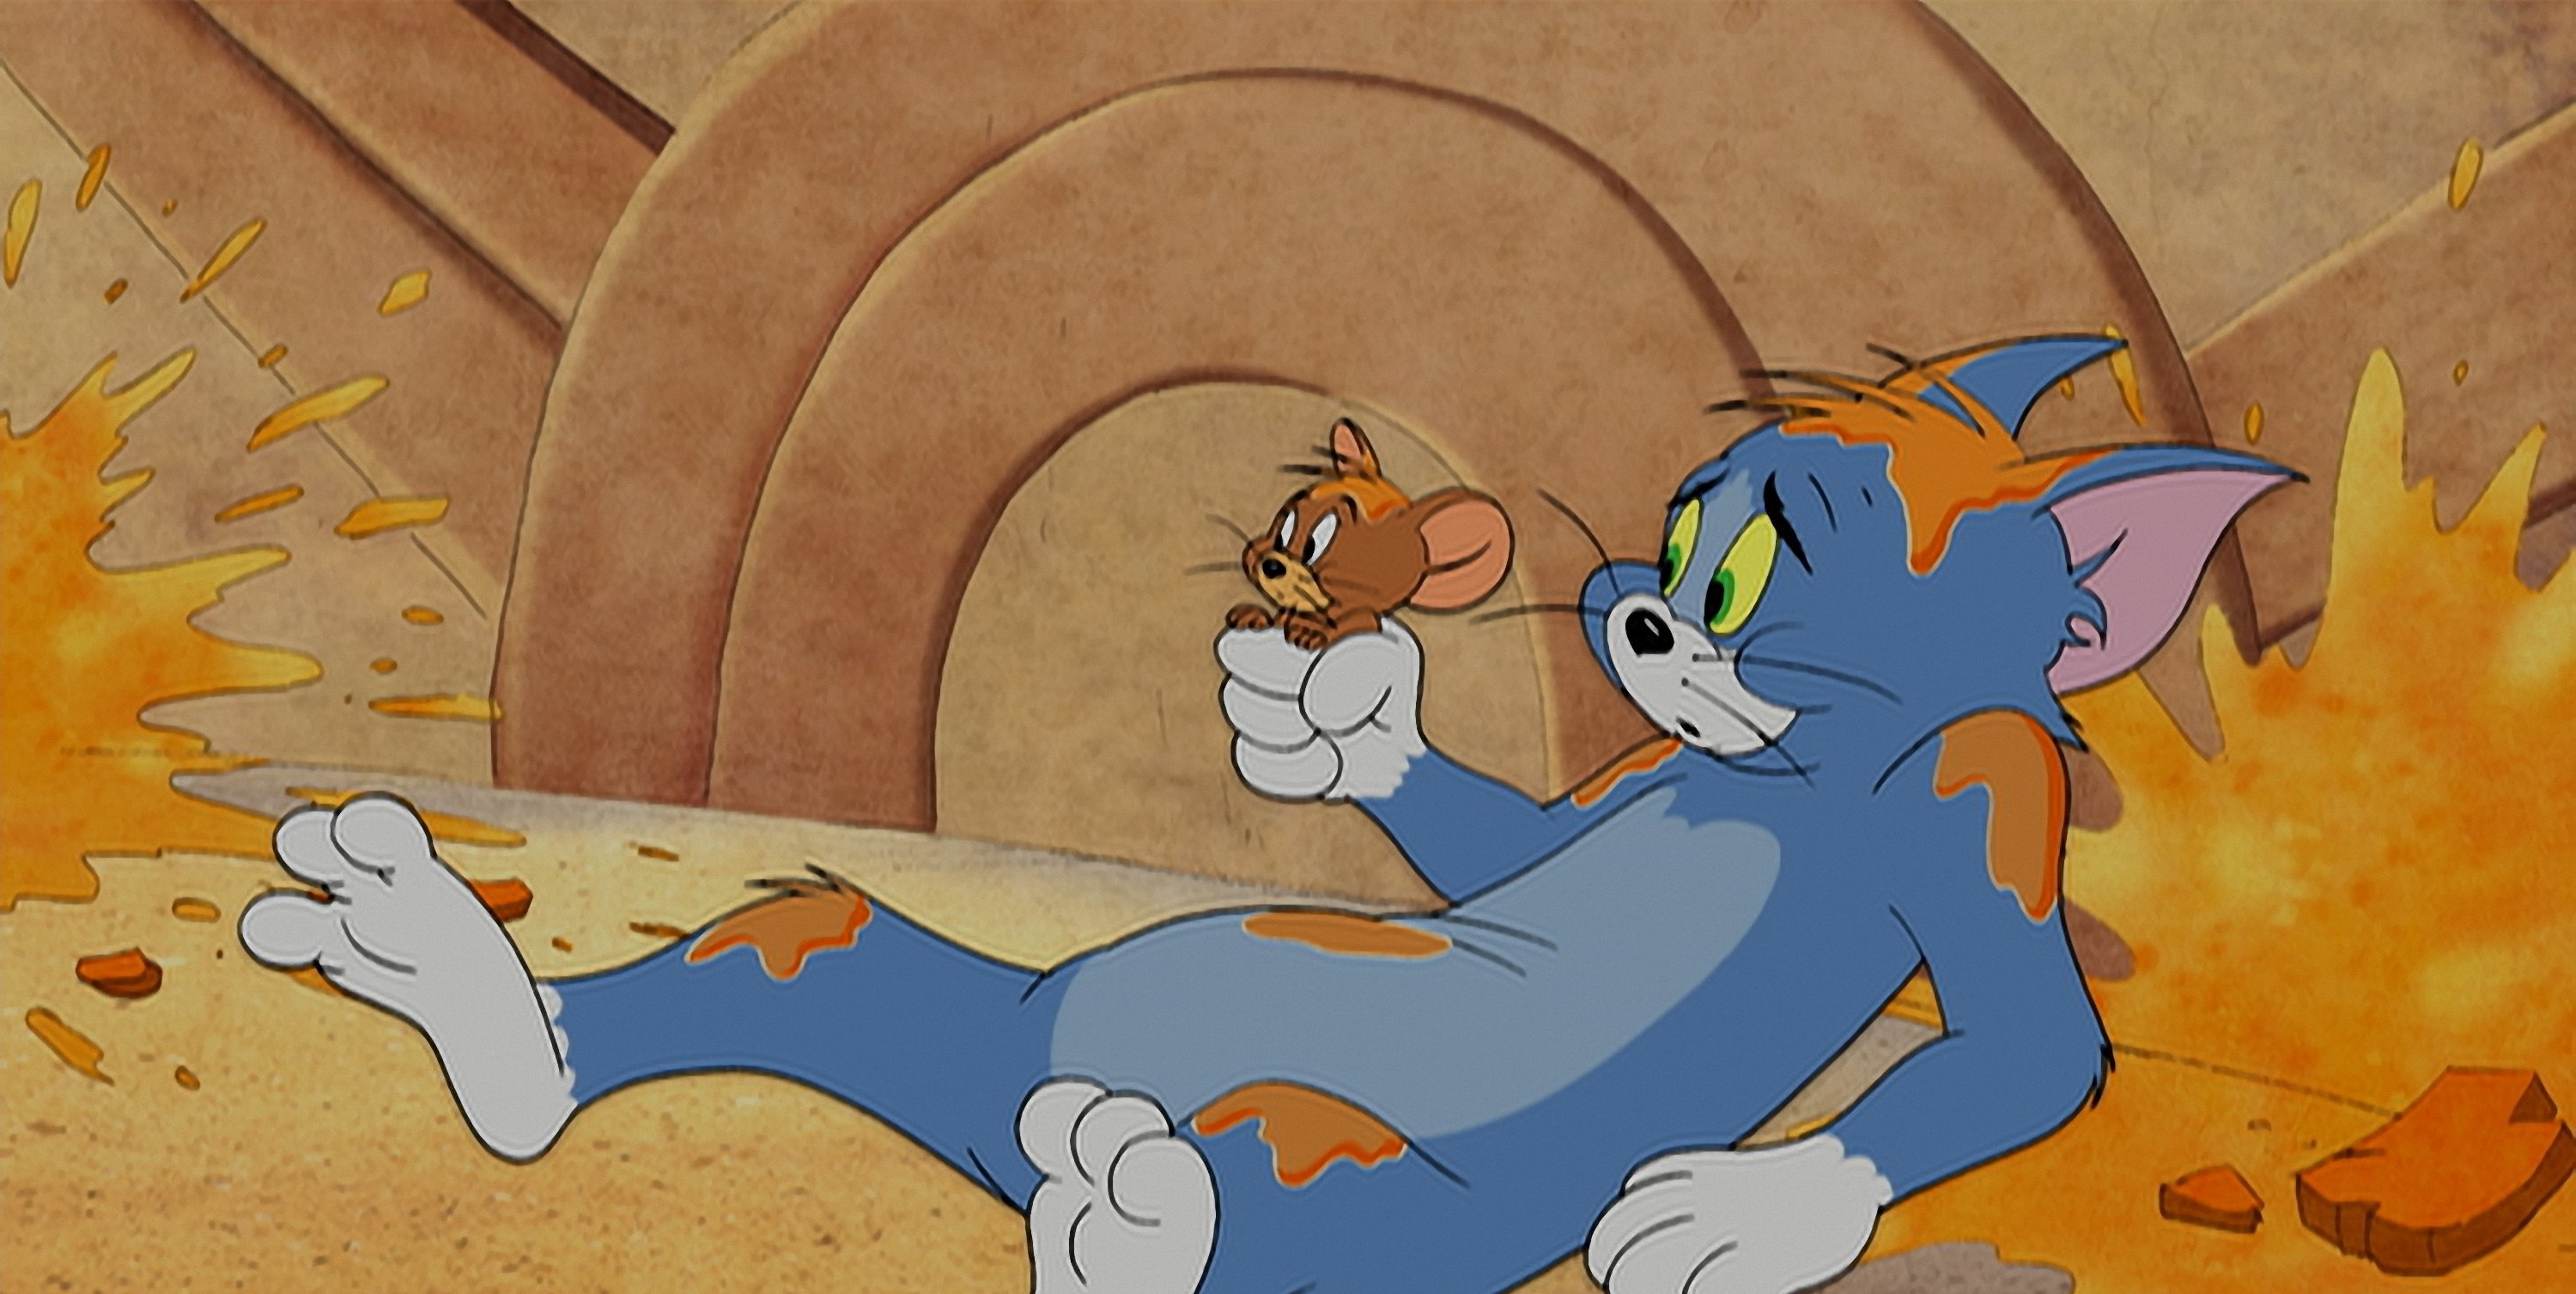 Amazoncom: Tom and Jerry: The Lost Dragon: Kelly Stables